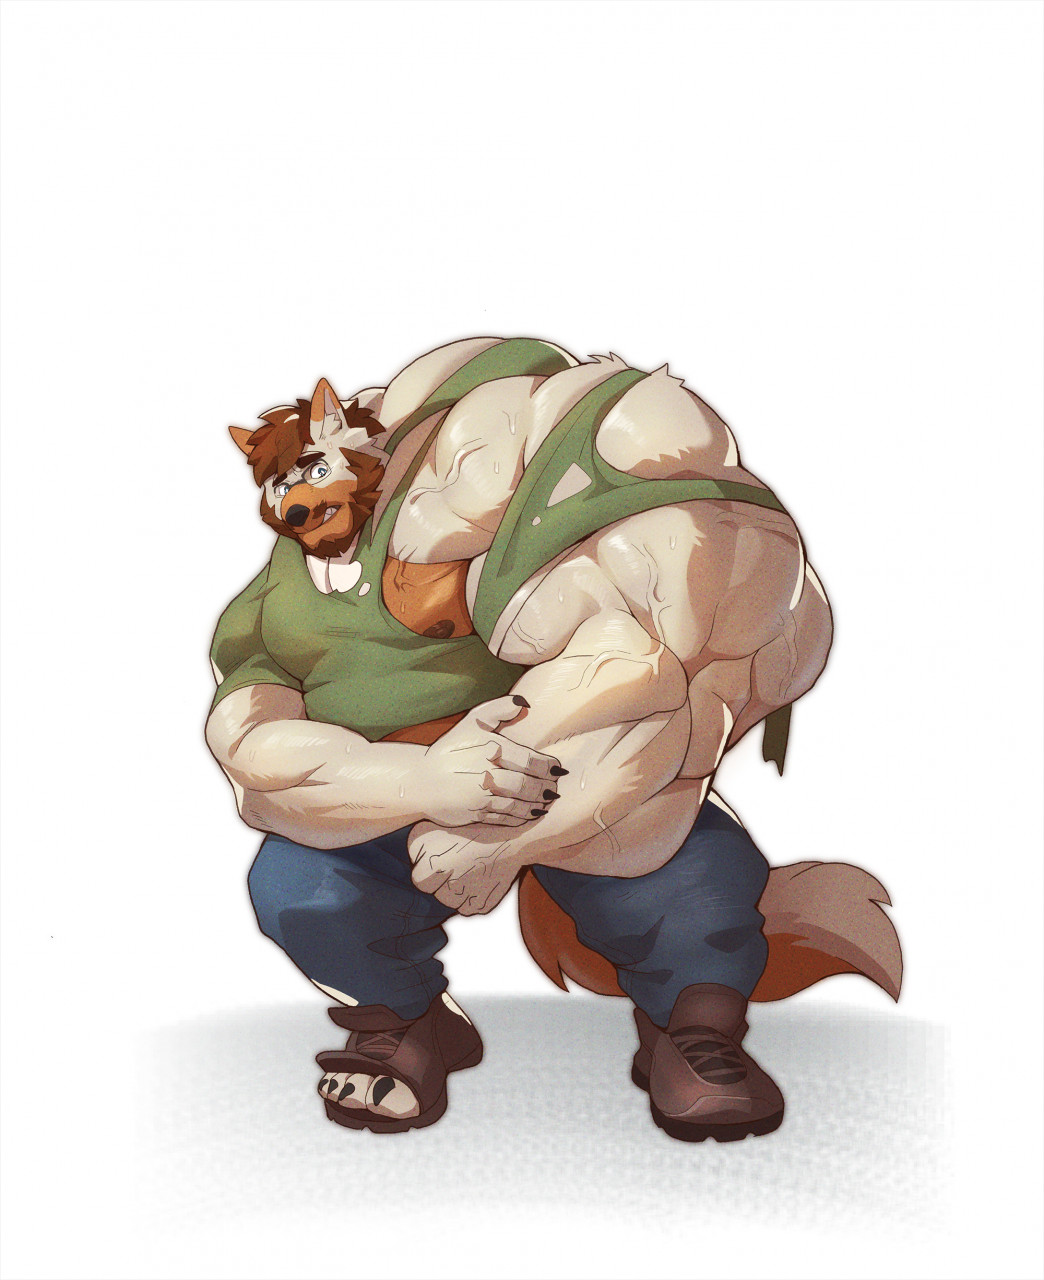 Muscle growth furry